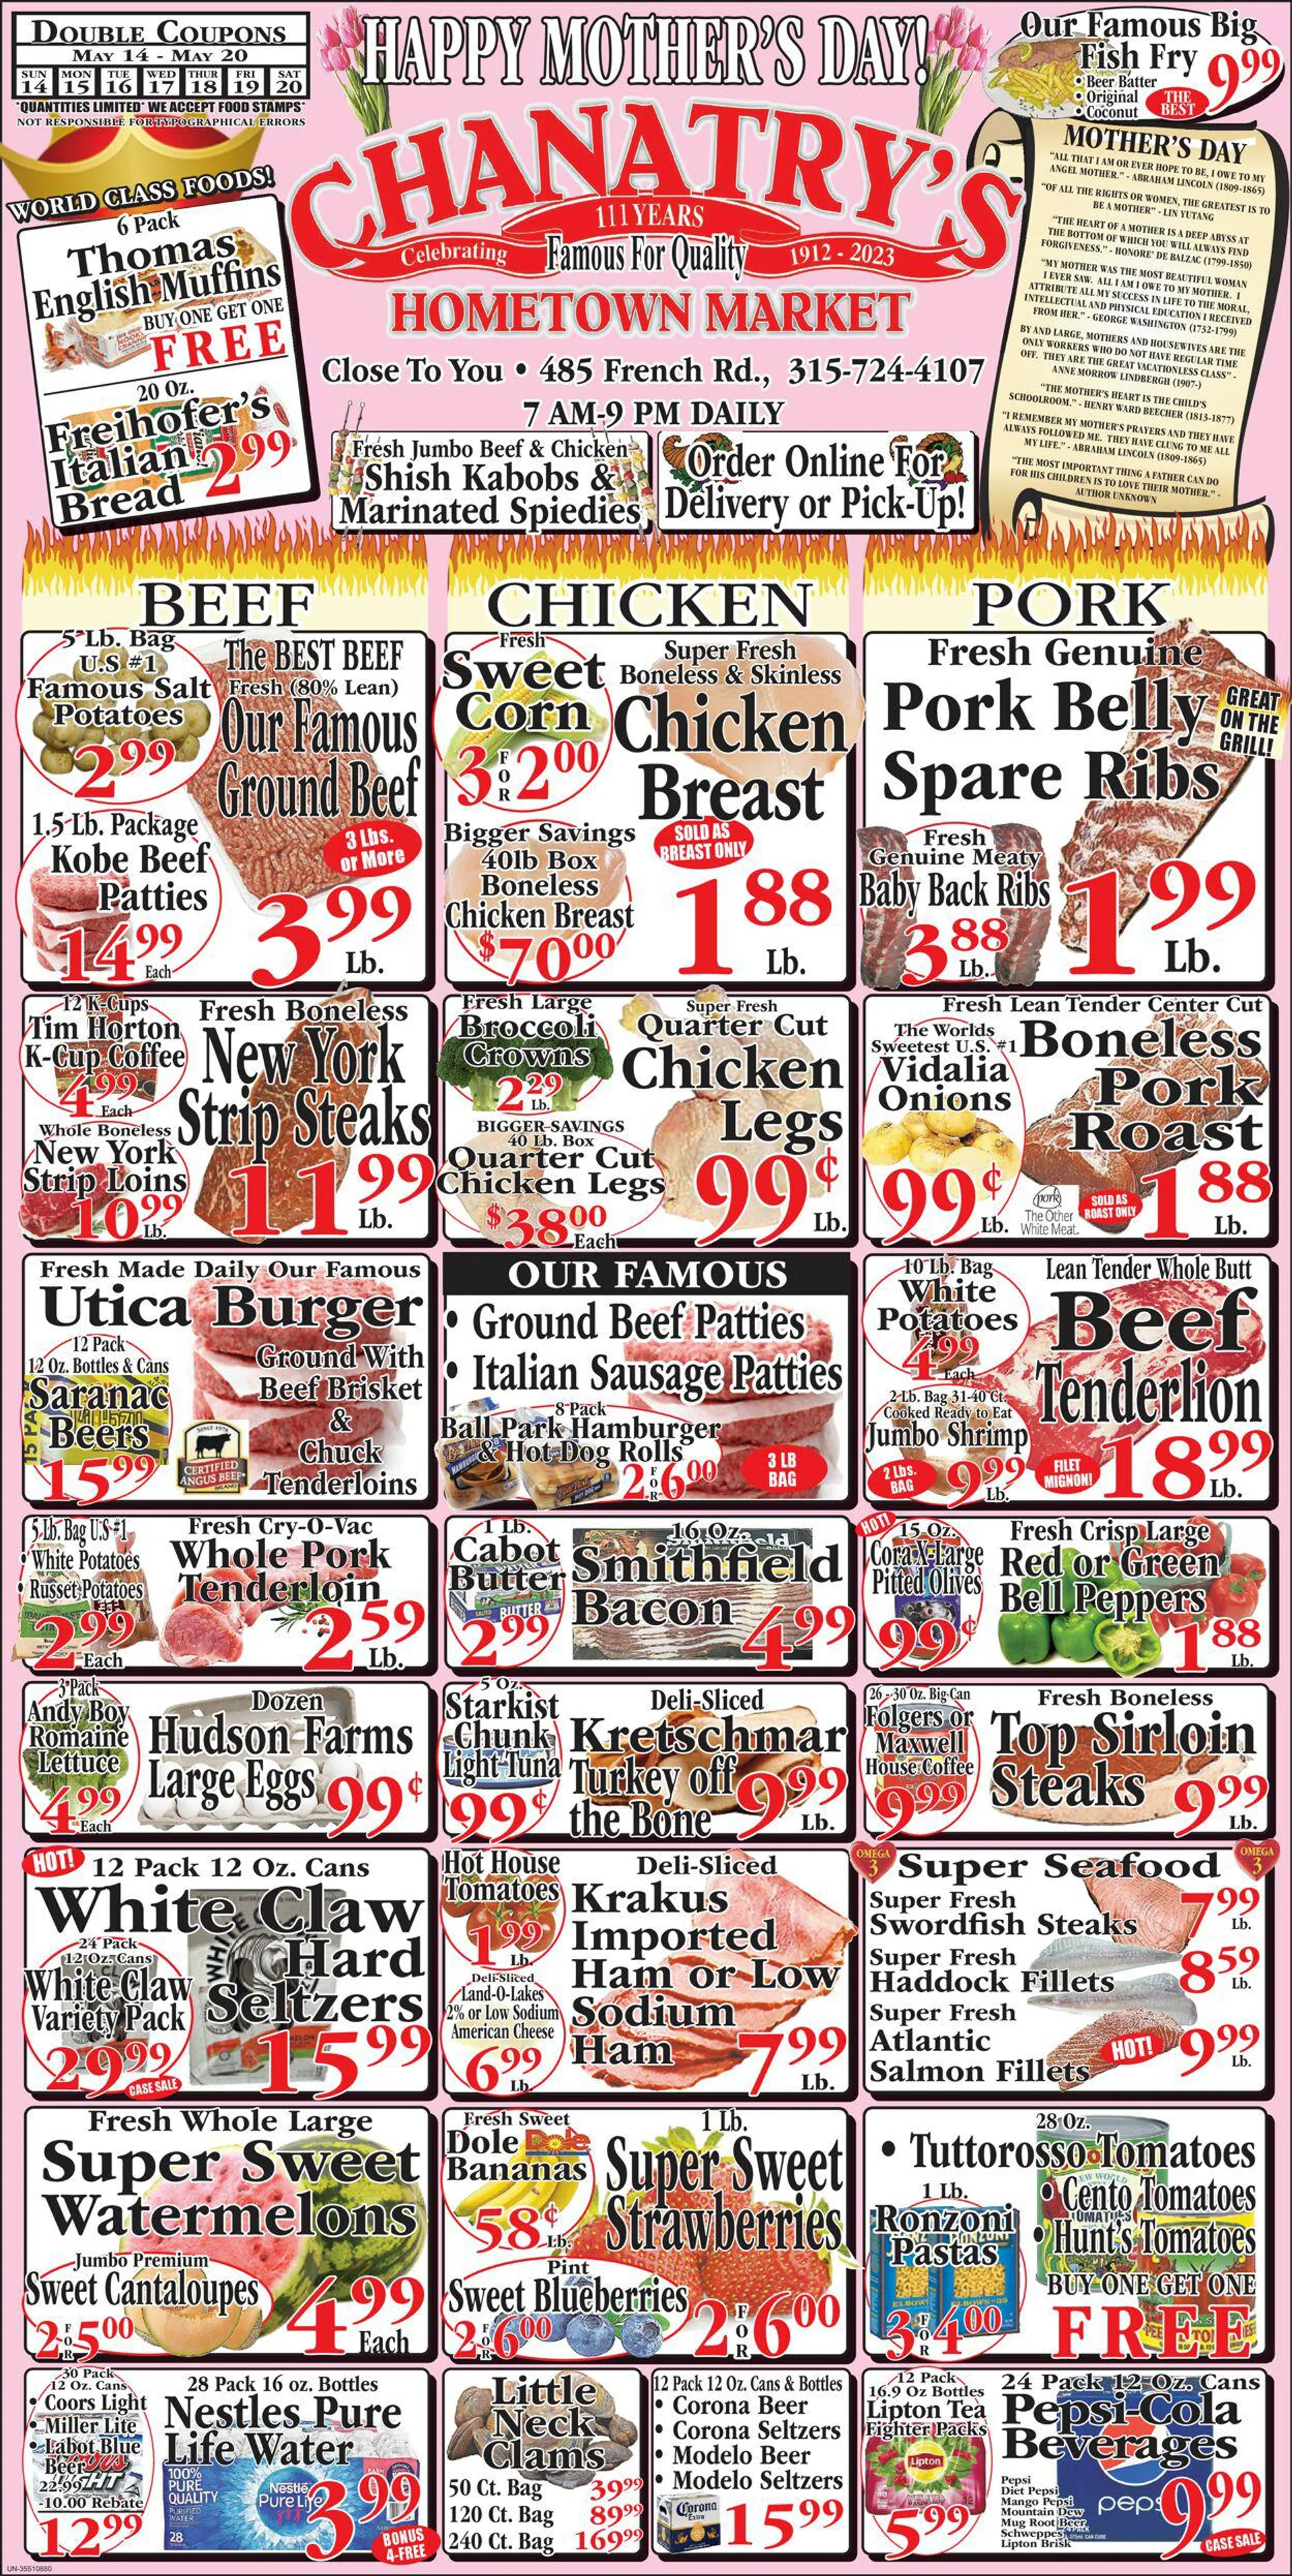 Chanatrys Hometown Market Current weekly ad - 1